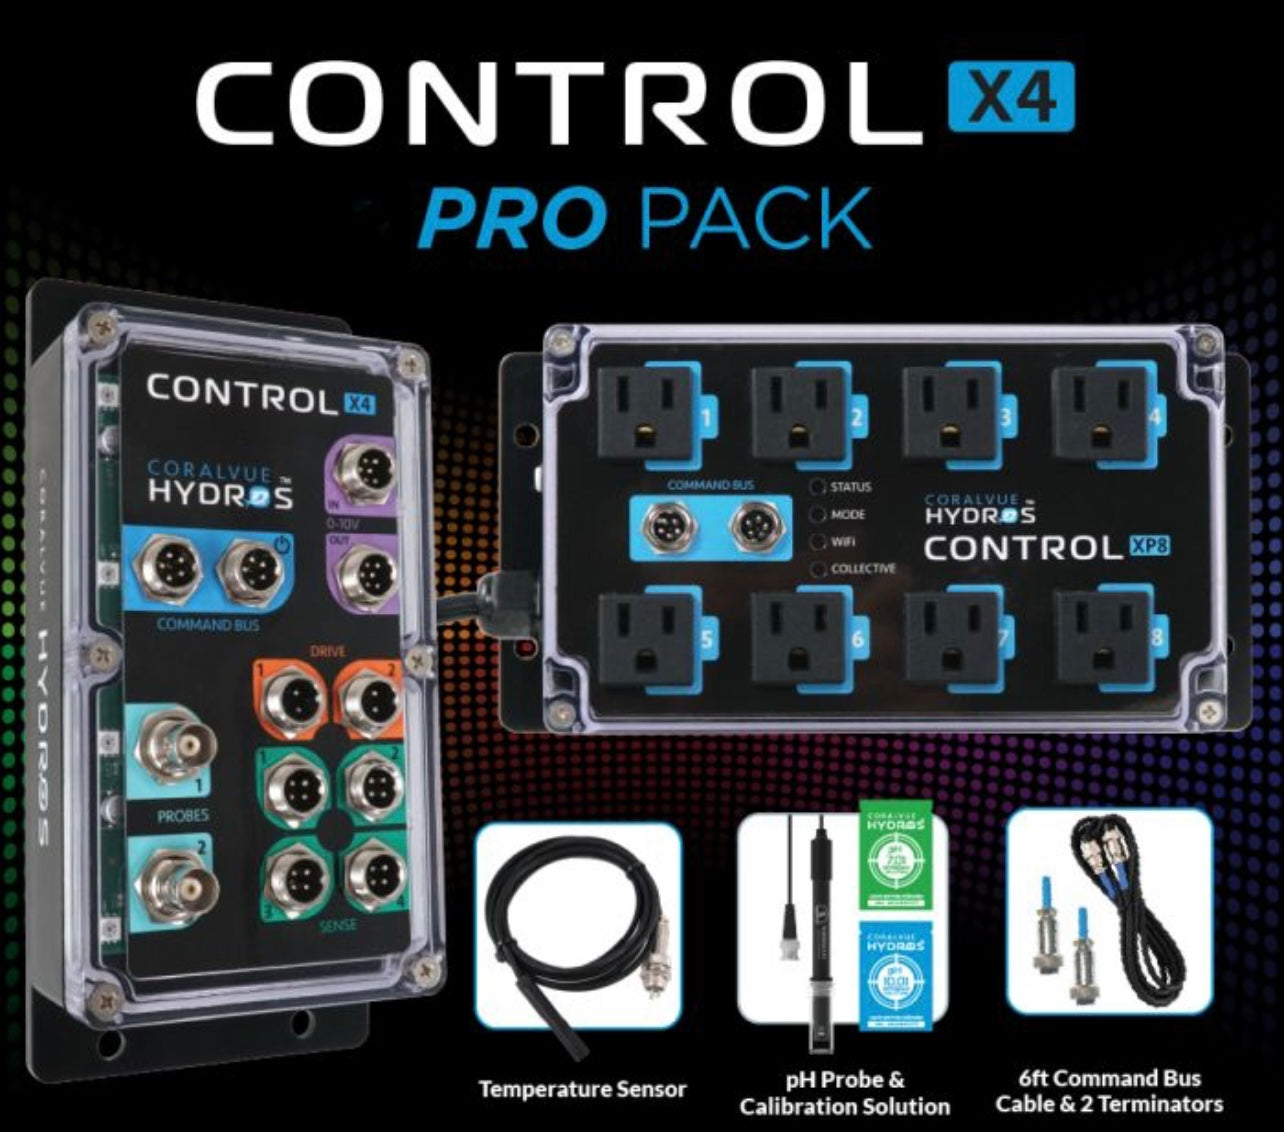 Hydros Control 4 Pro pack